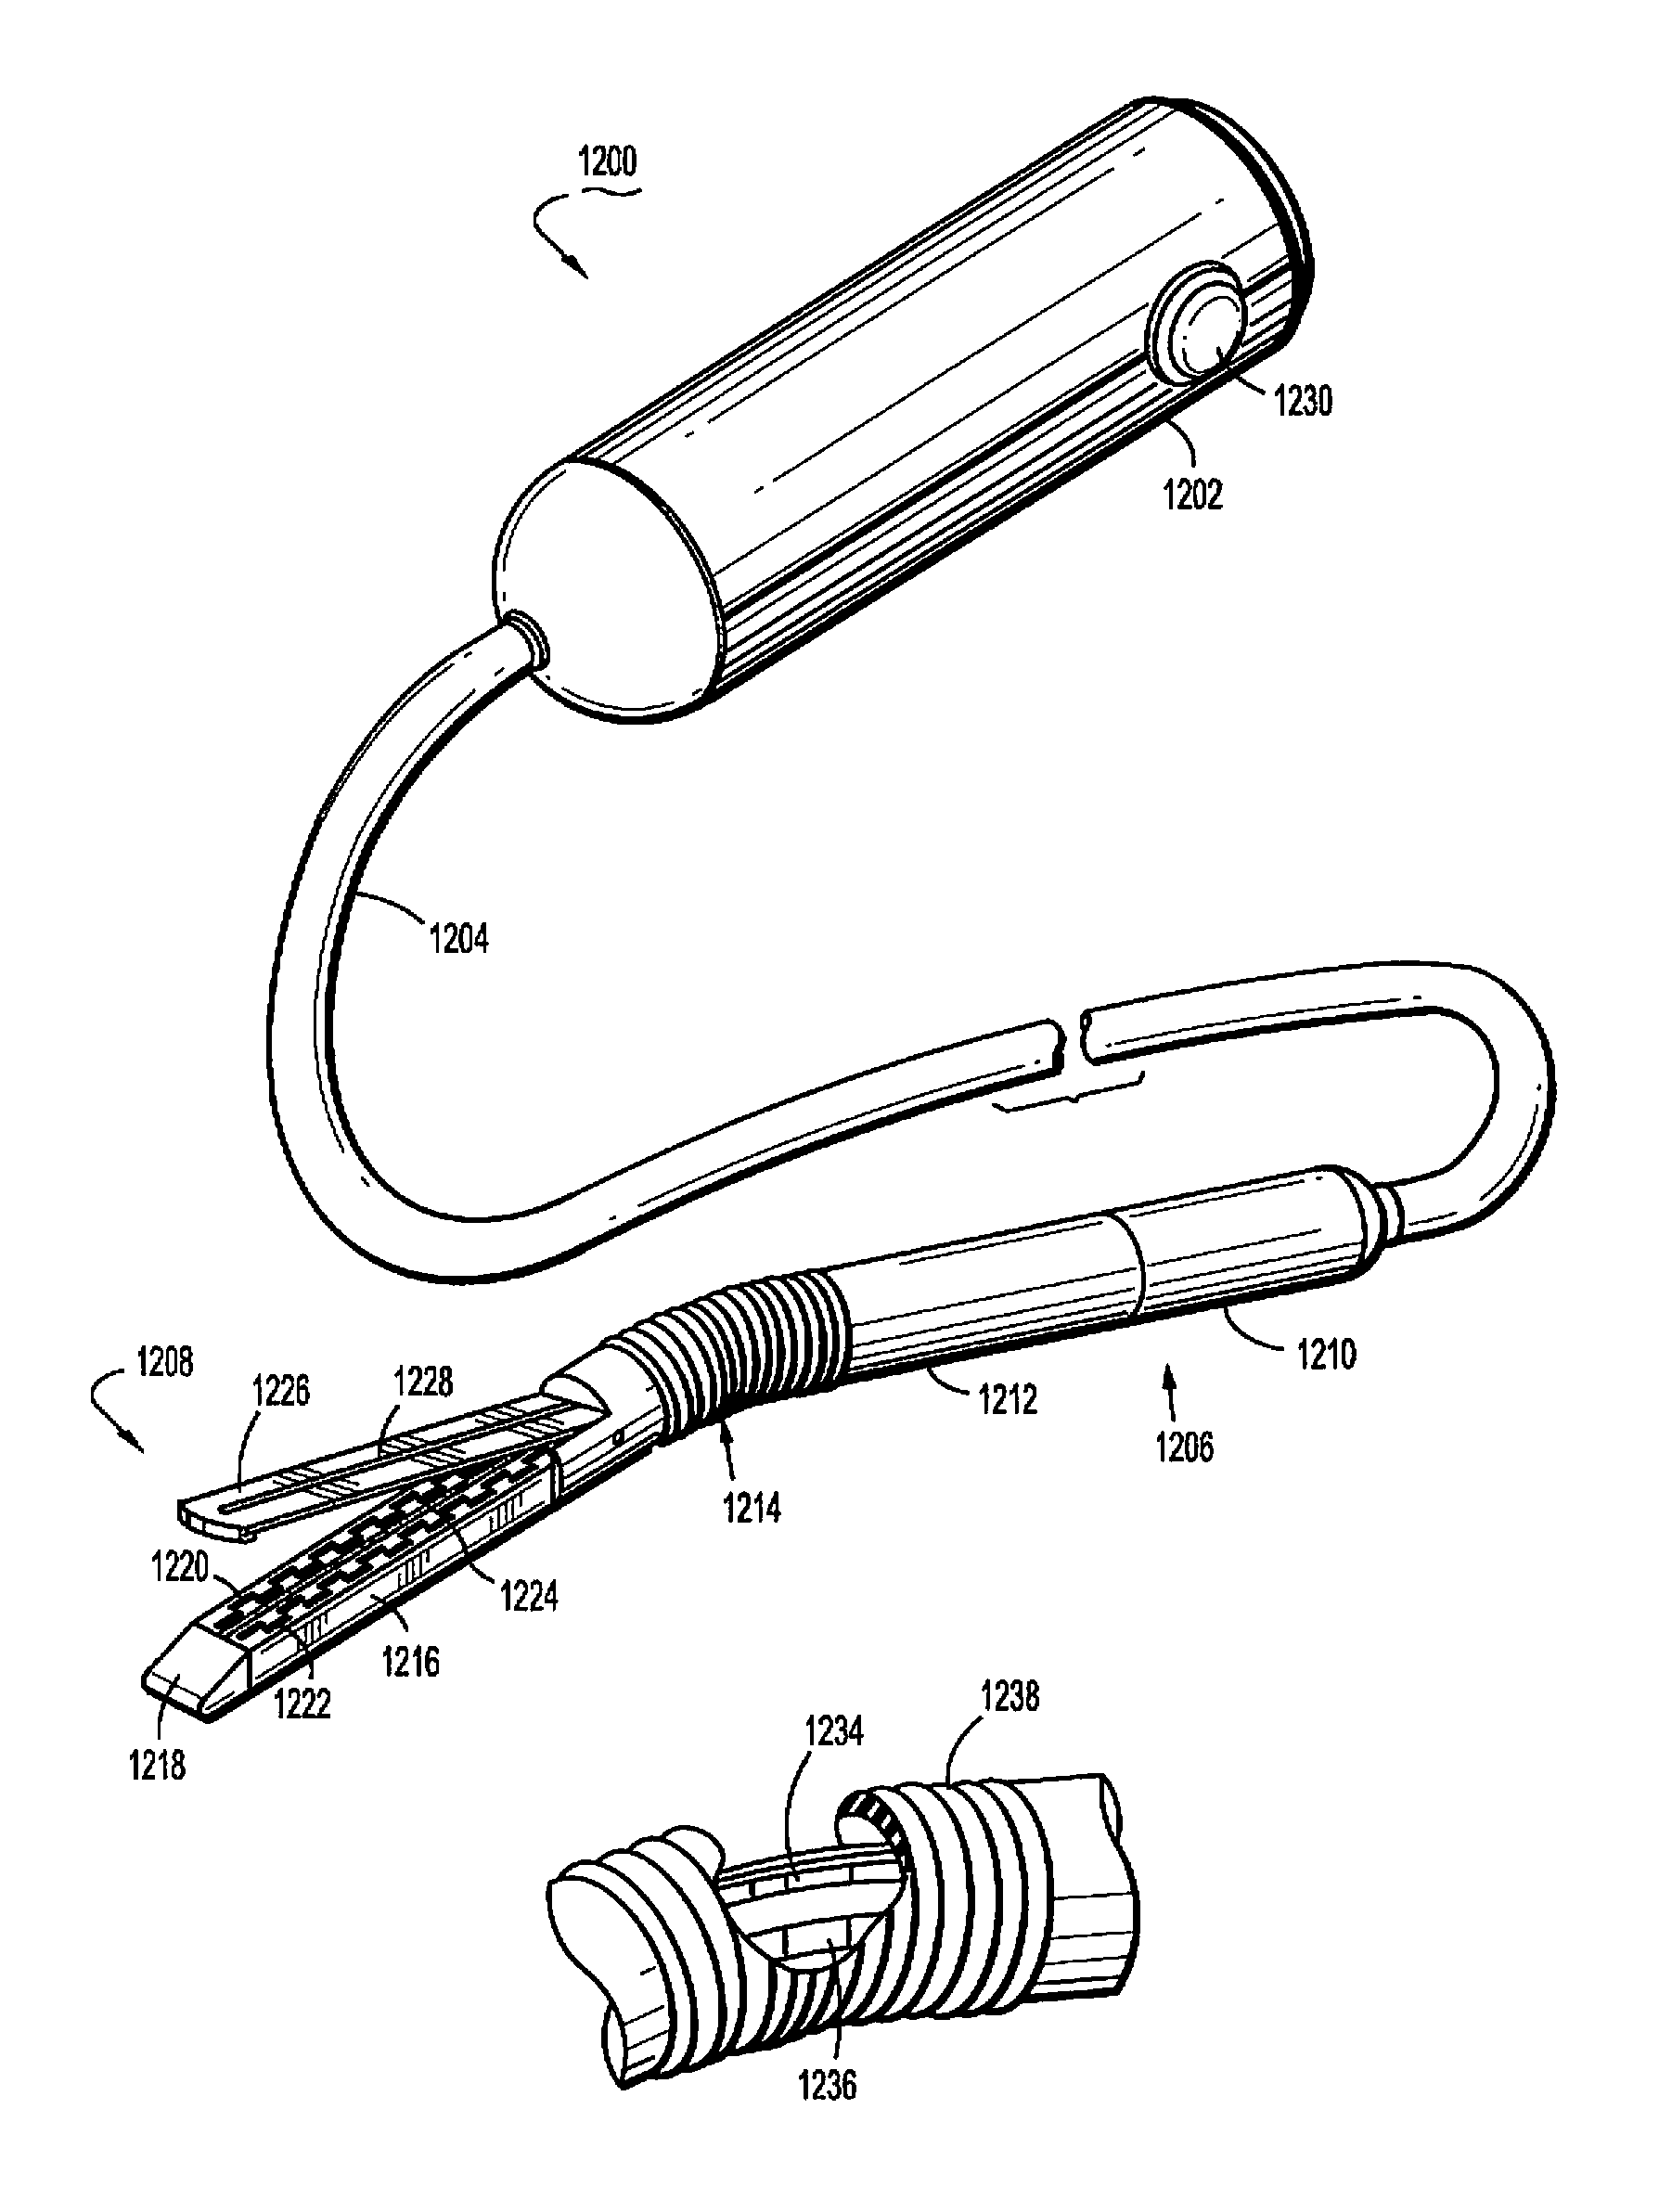 Flexible surgical stapler with motor in the head